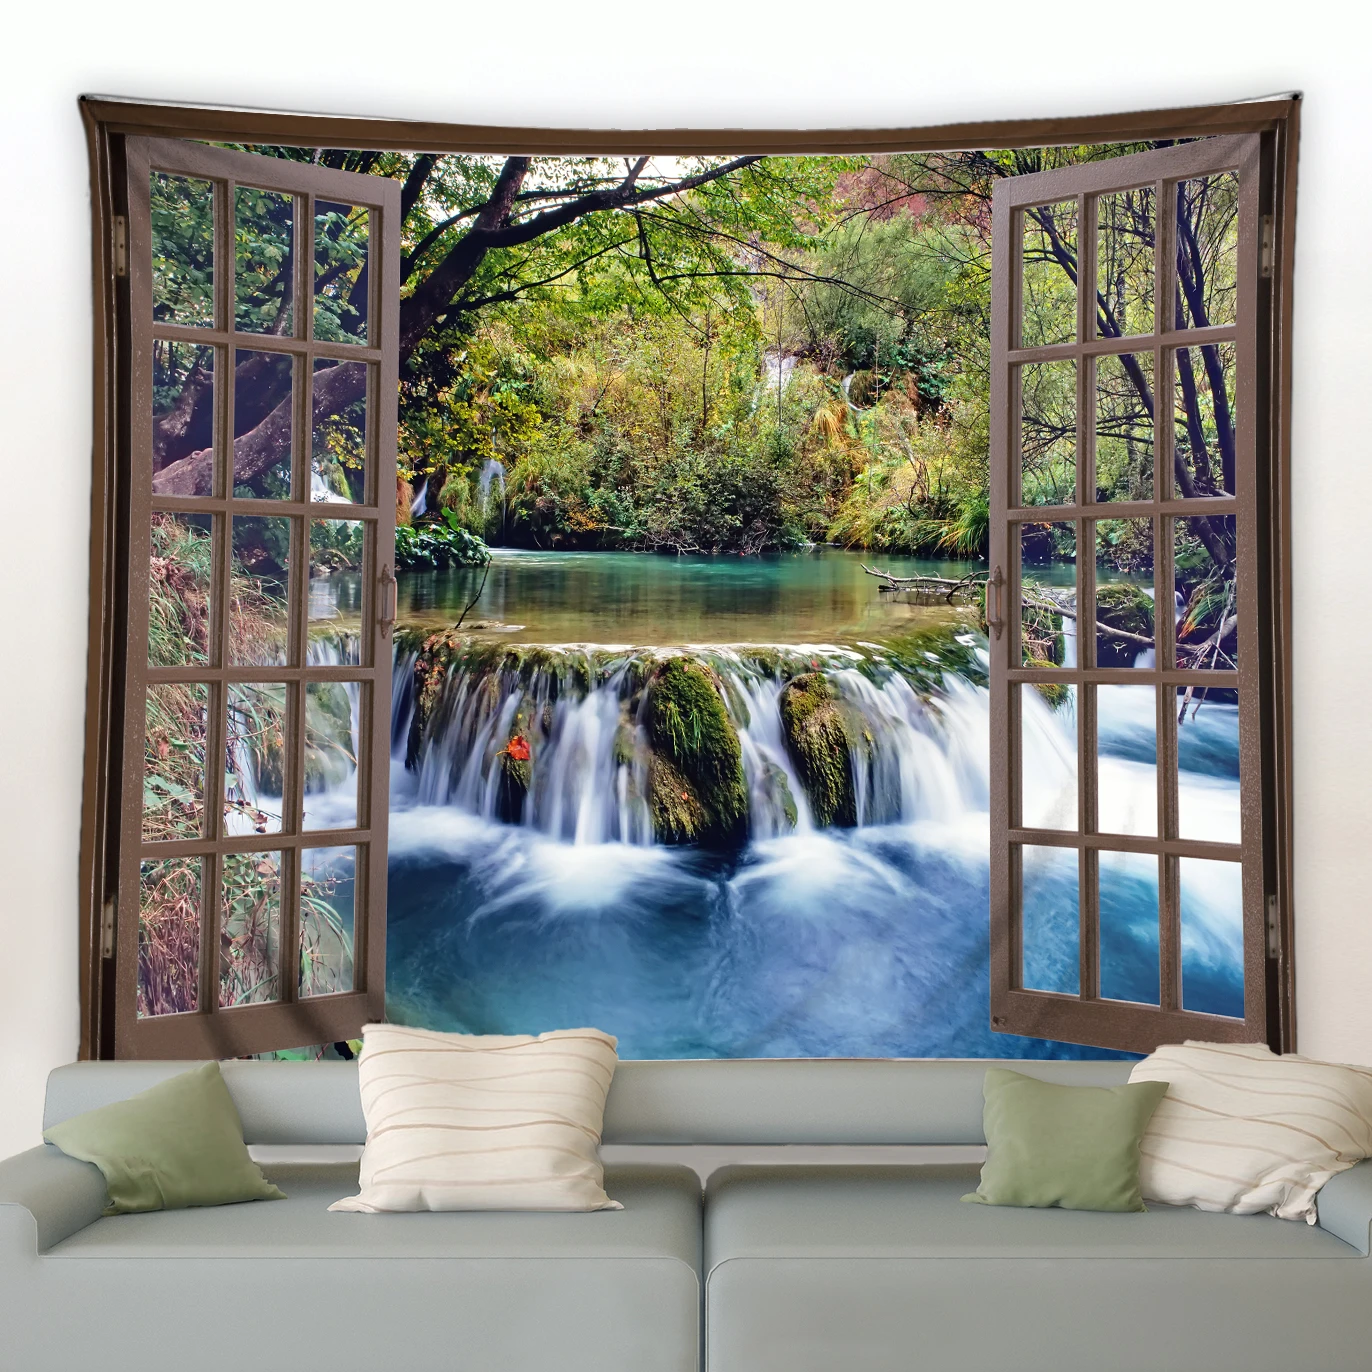 

Window Beautiful Scenery Tapestry Wall Hanging Green Trees Forest Waterfall Landscape Decor Cloth Bedroom Living Room Dormitory